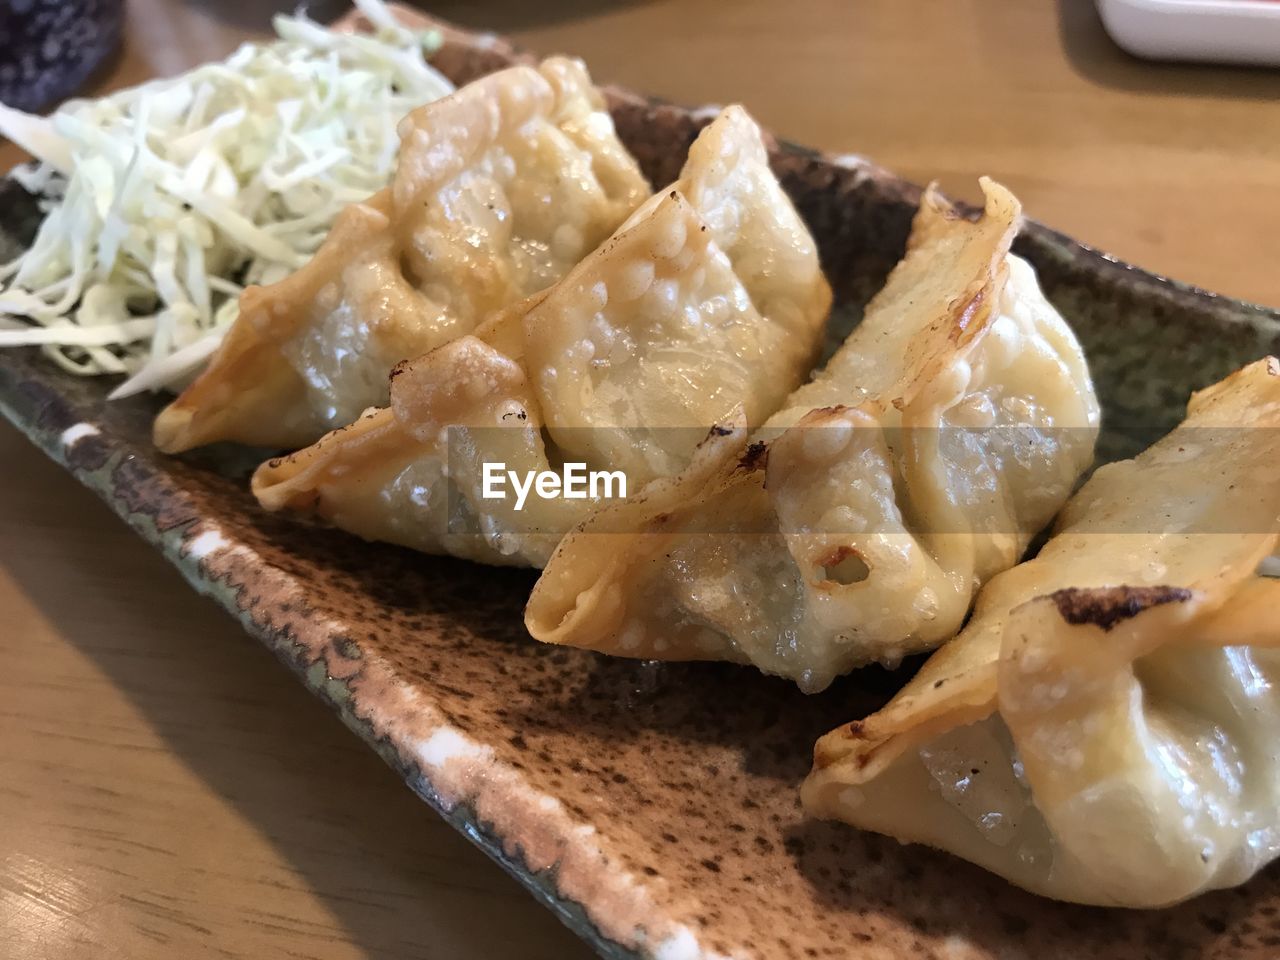 food and drink, food, asian food, freshness, dish, indoors, healthy eating, mandu, cuisine, dumpling, chinese food, wellbeing, table, no people, close-up, still life, wonton, chinese dumpling, focus on foreground, wood, serving size, japanese food, seafood, plate, meal